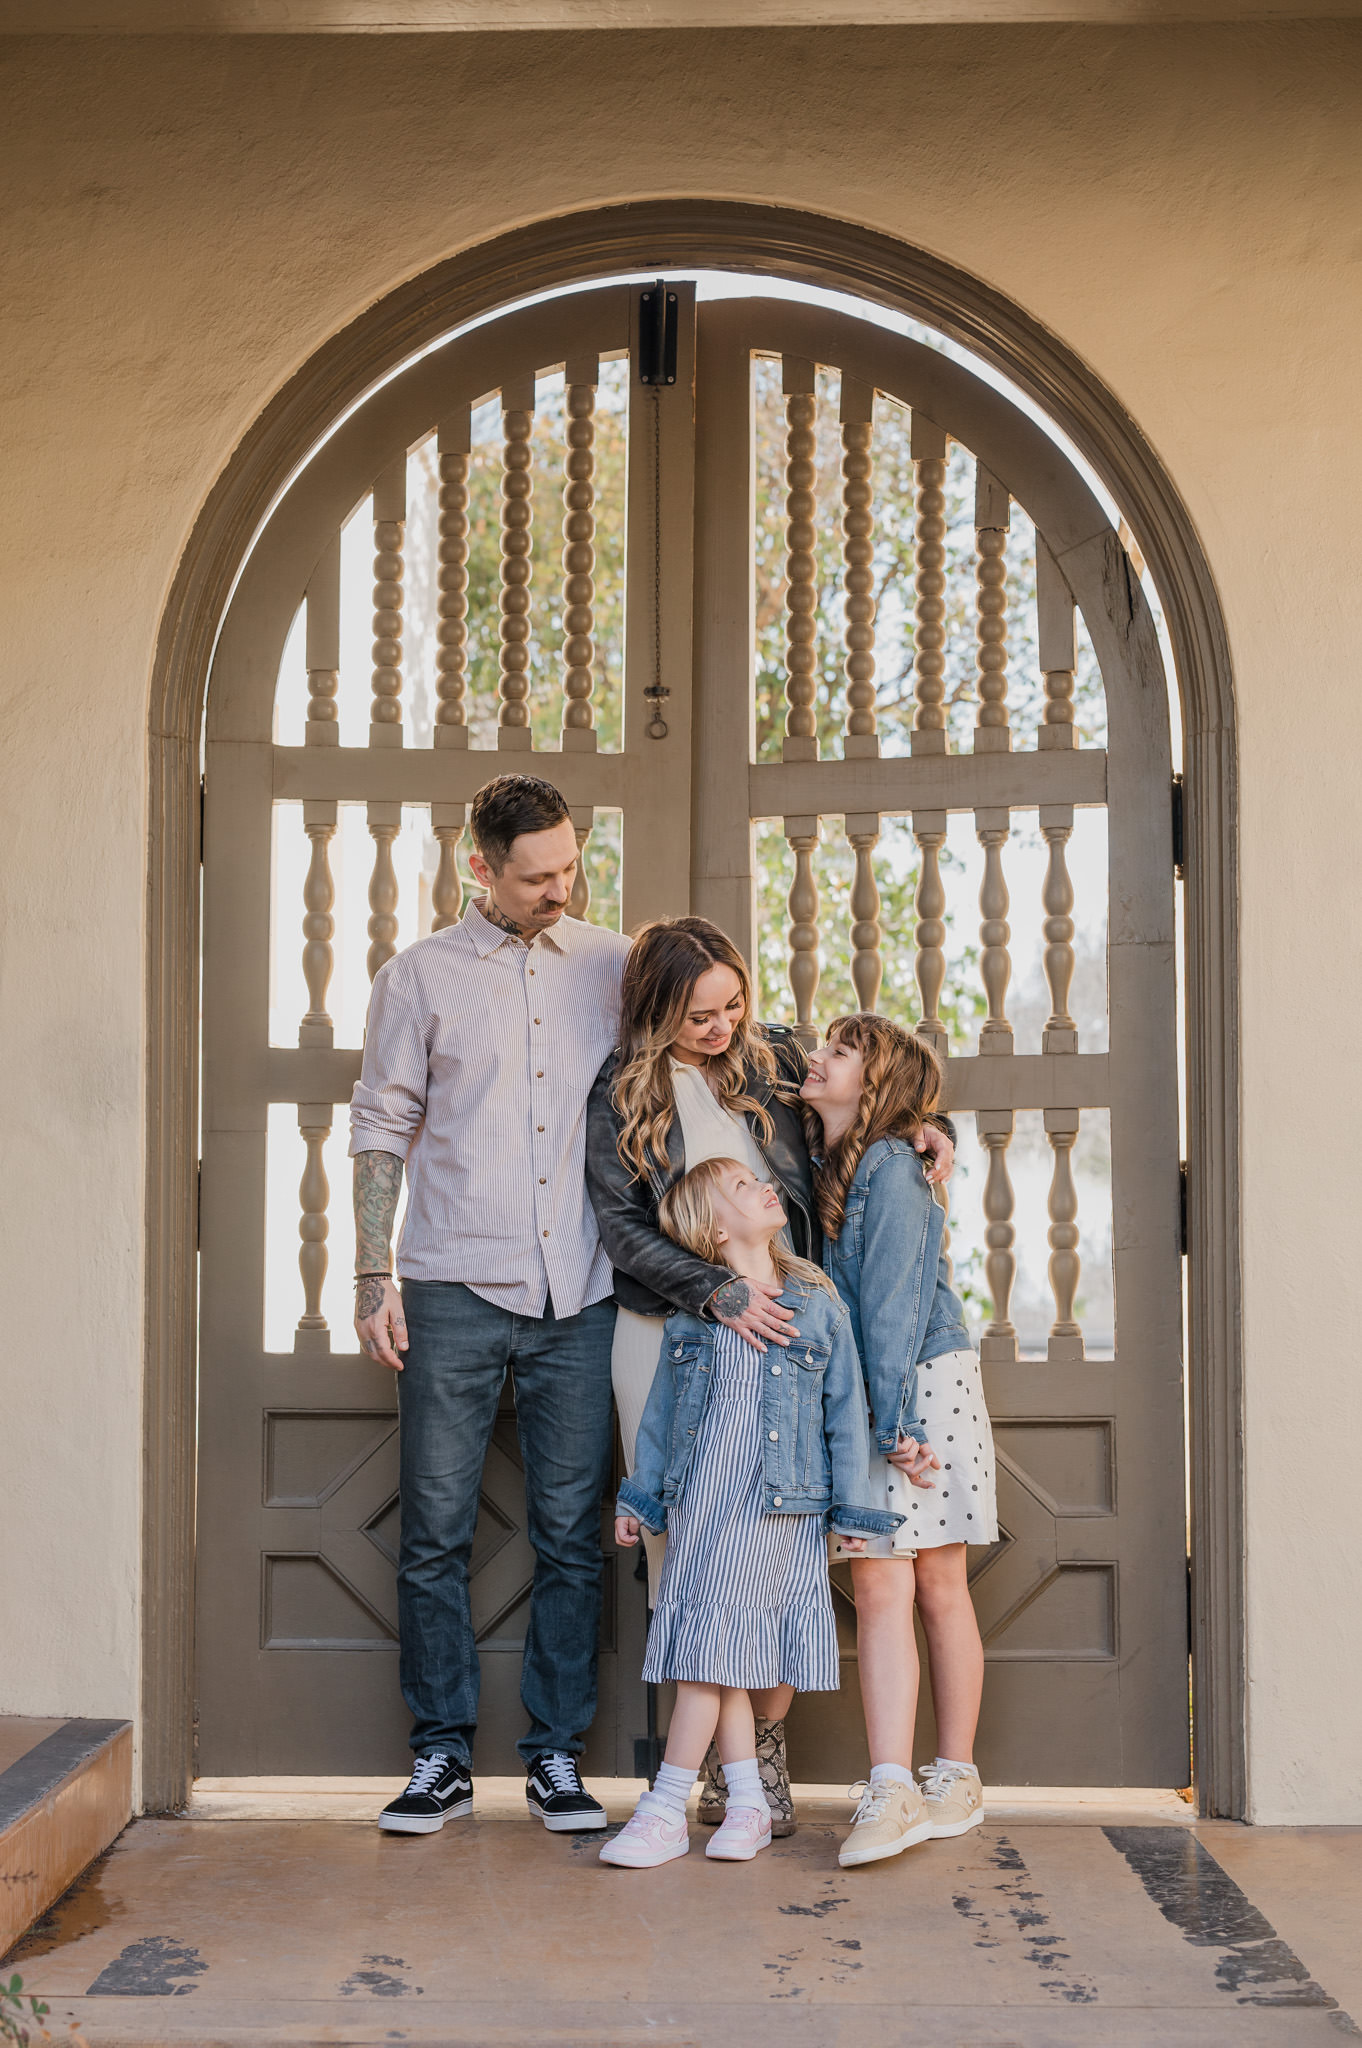 A young family interacts and laughs together. They are standing in front of a beautiful arched doorway on the grounds of Landa Library in San Antonio.